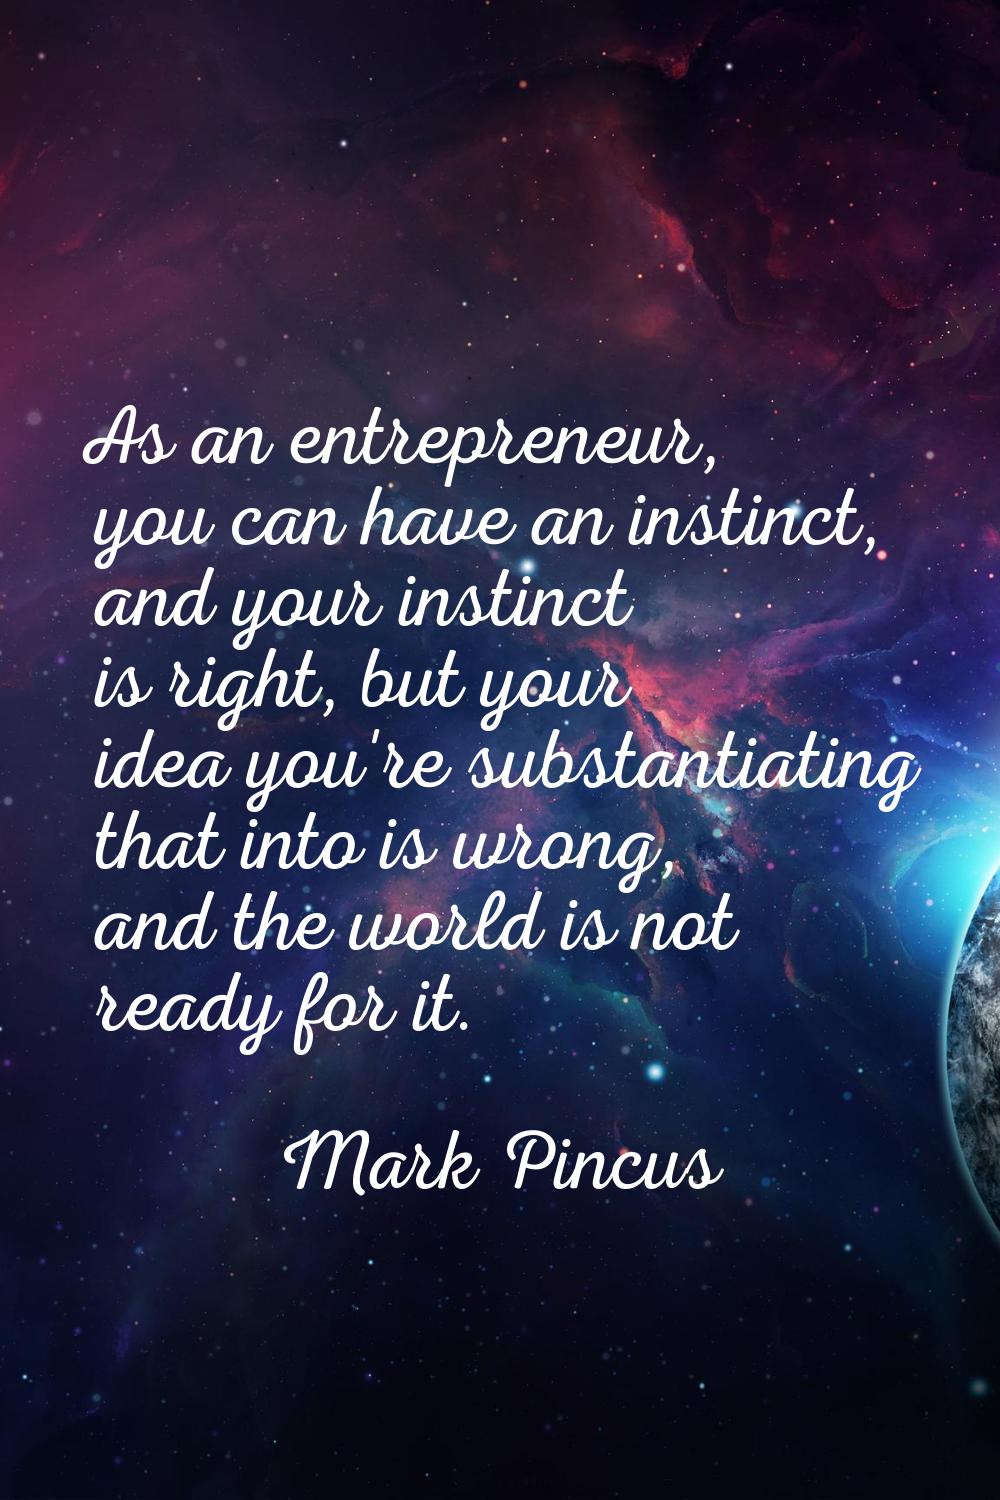 As an entrepreneur, you can have an instinct, and your instinct is right, but your idea you're subs